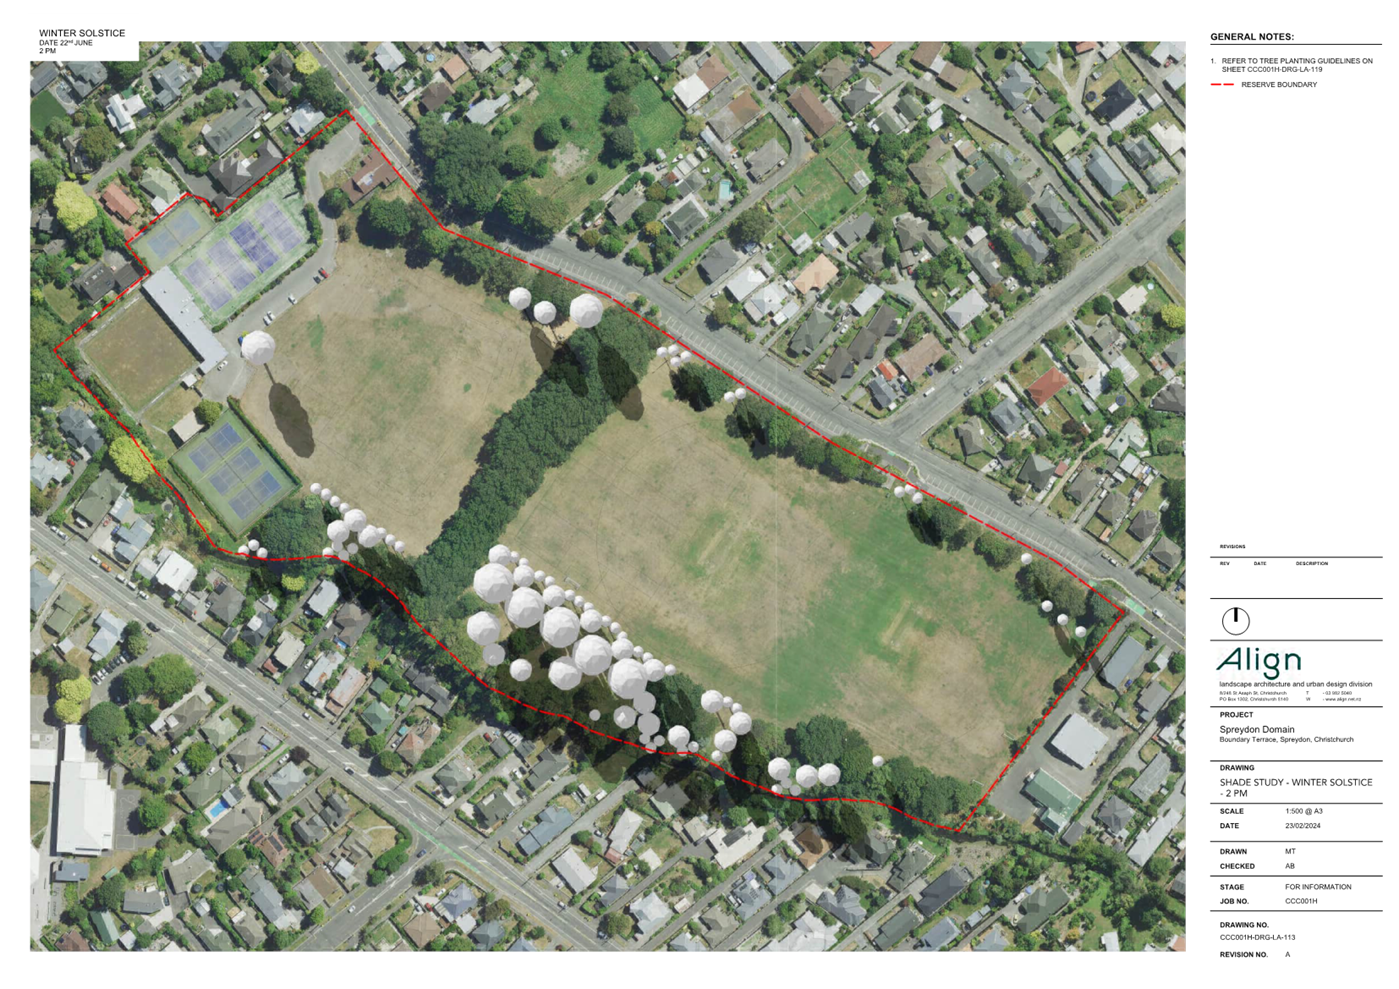 An aerial view of a park

Description automatically generated